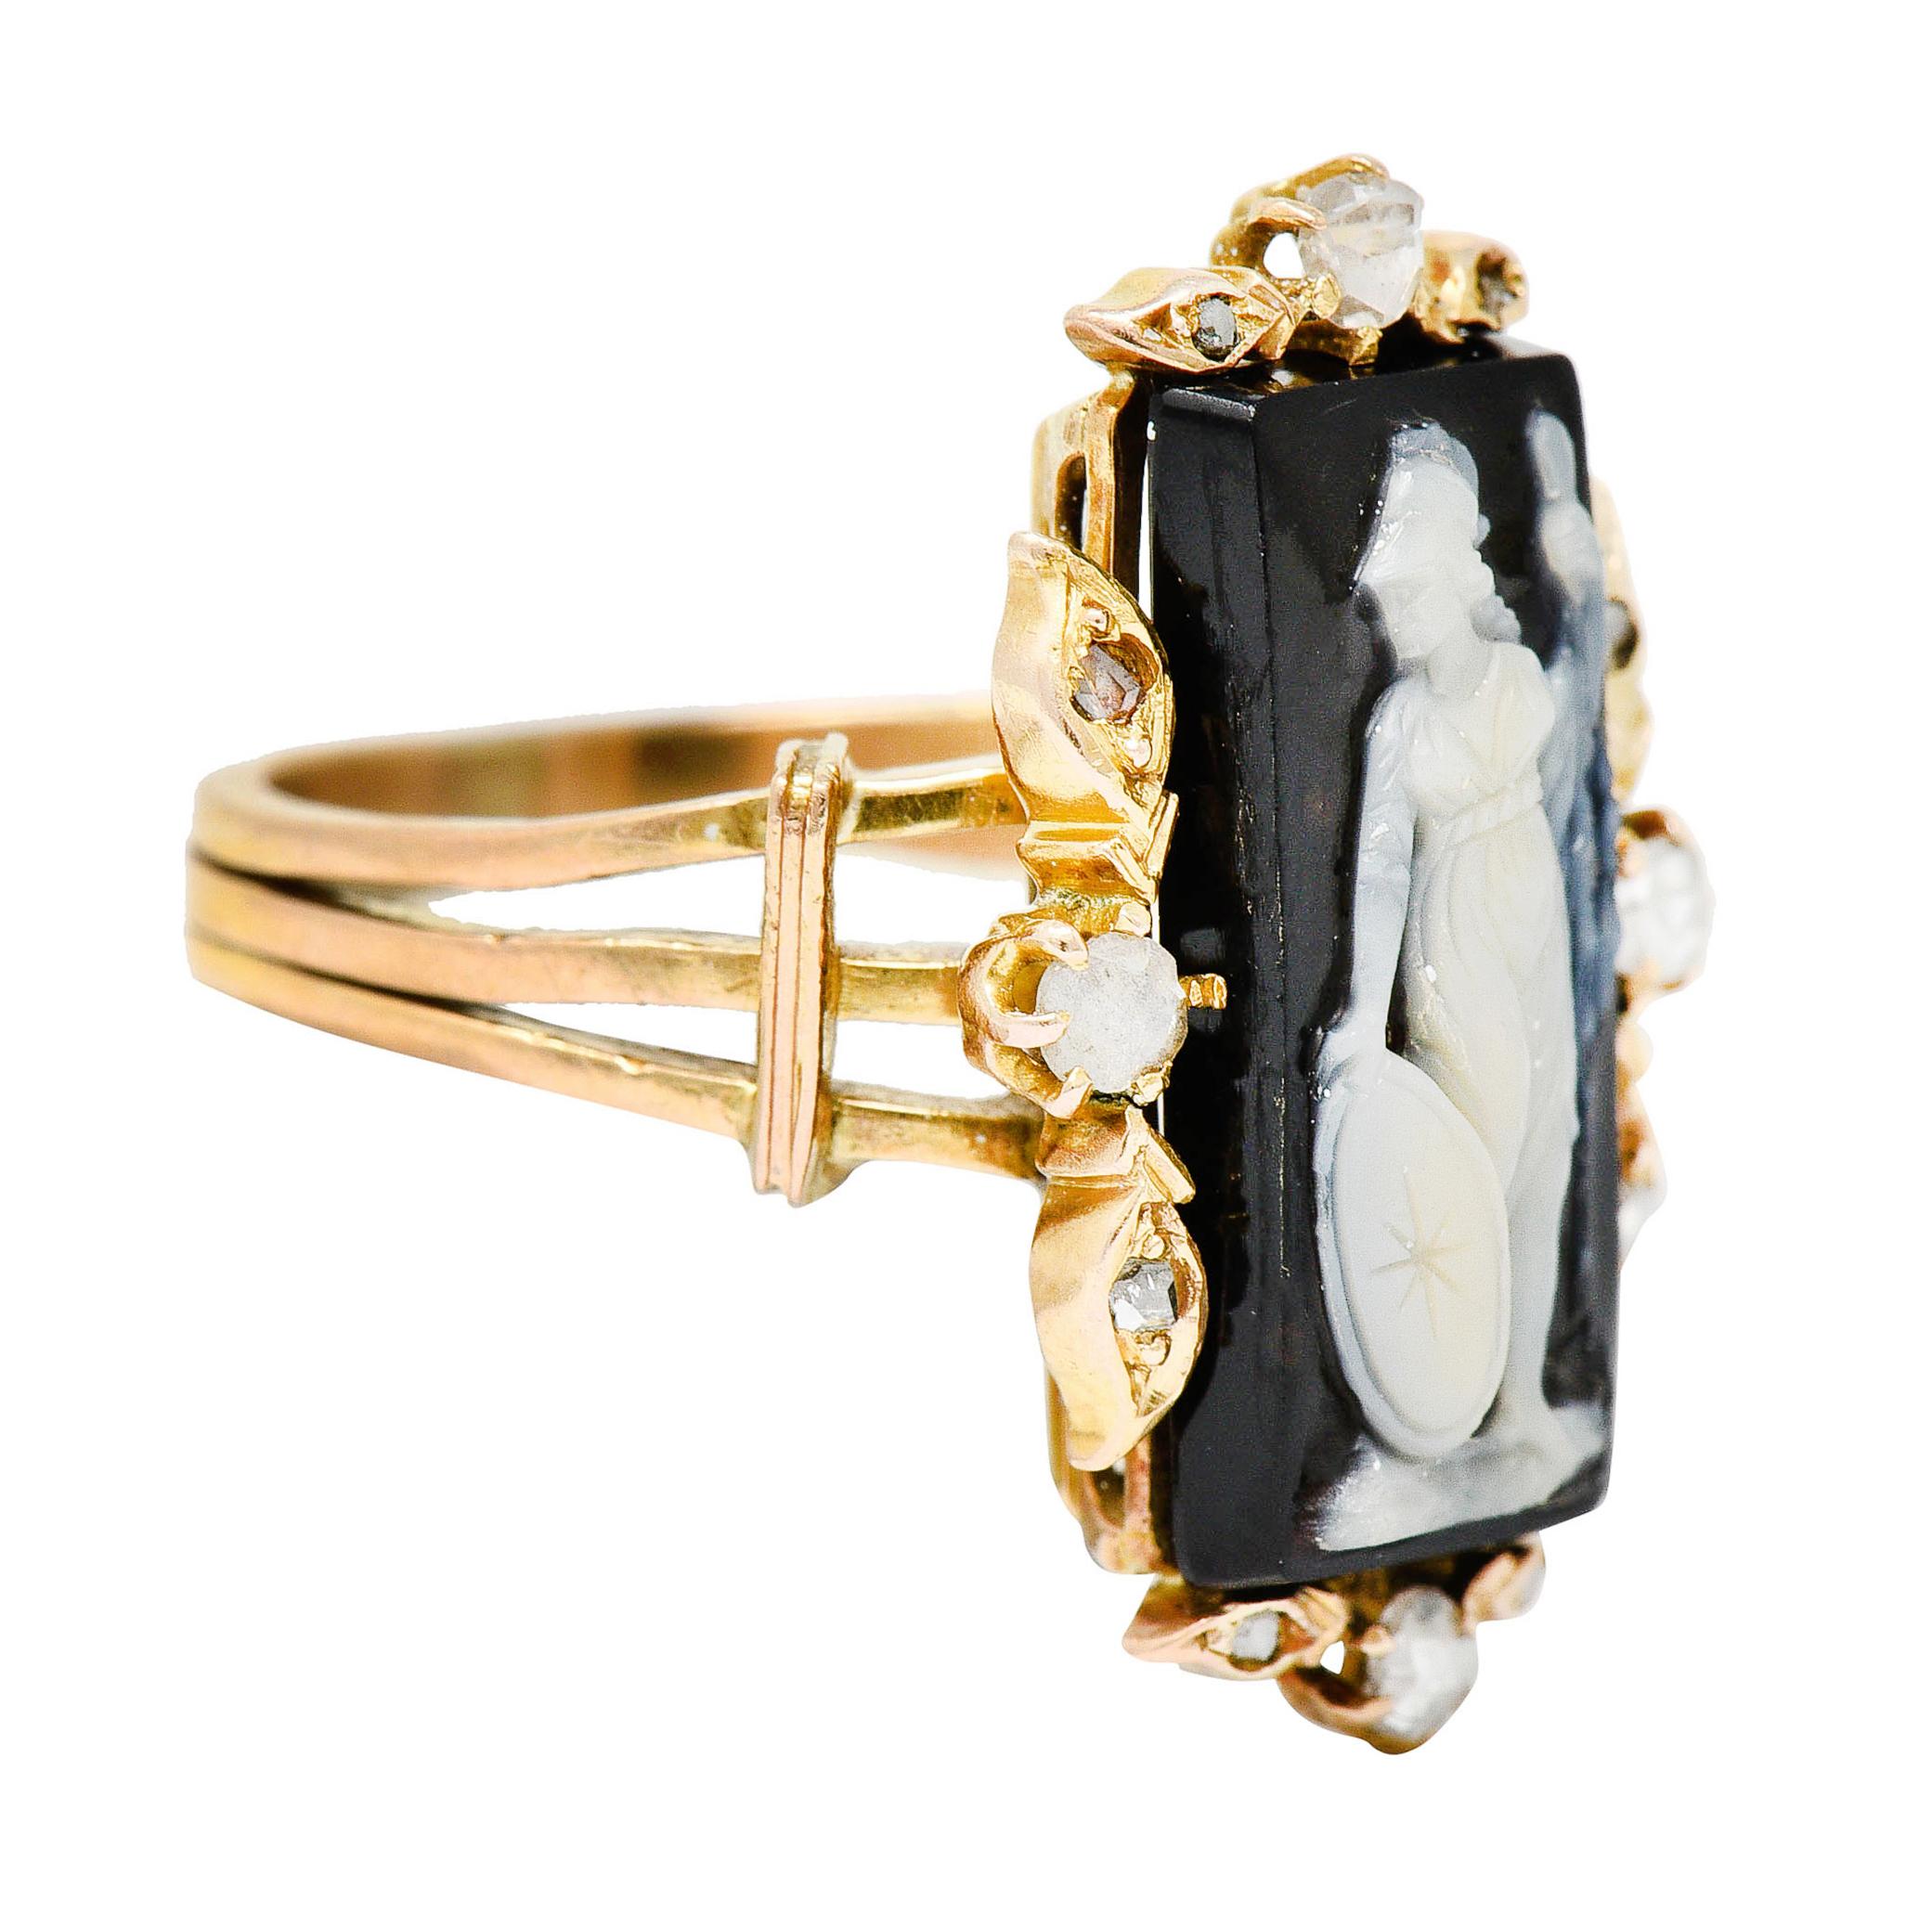 Centering a rectangular tablet of onyx agate deeply carved to depict the goddess Athena

Figure is translucently cream in color and features her iconic star emblazoned shield

With gold foliate stations at each cardinal point - accented by rose cut